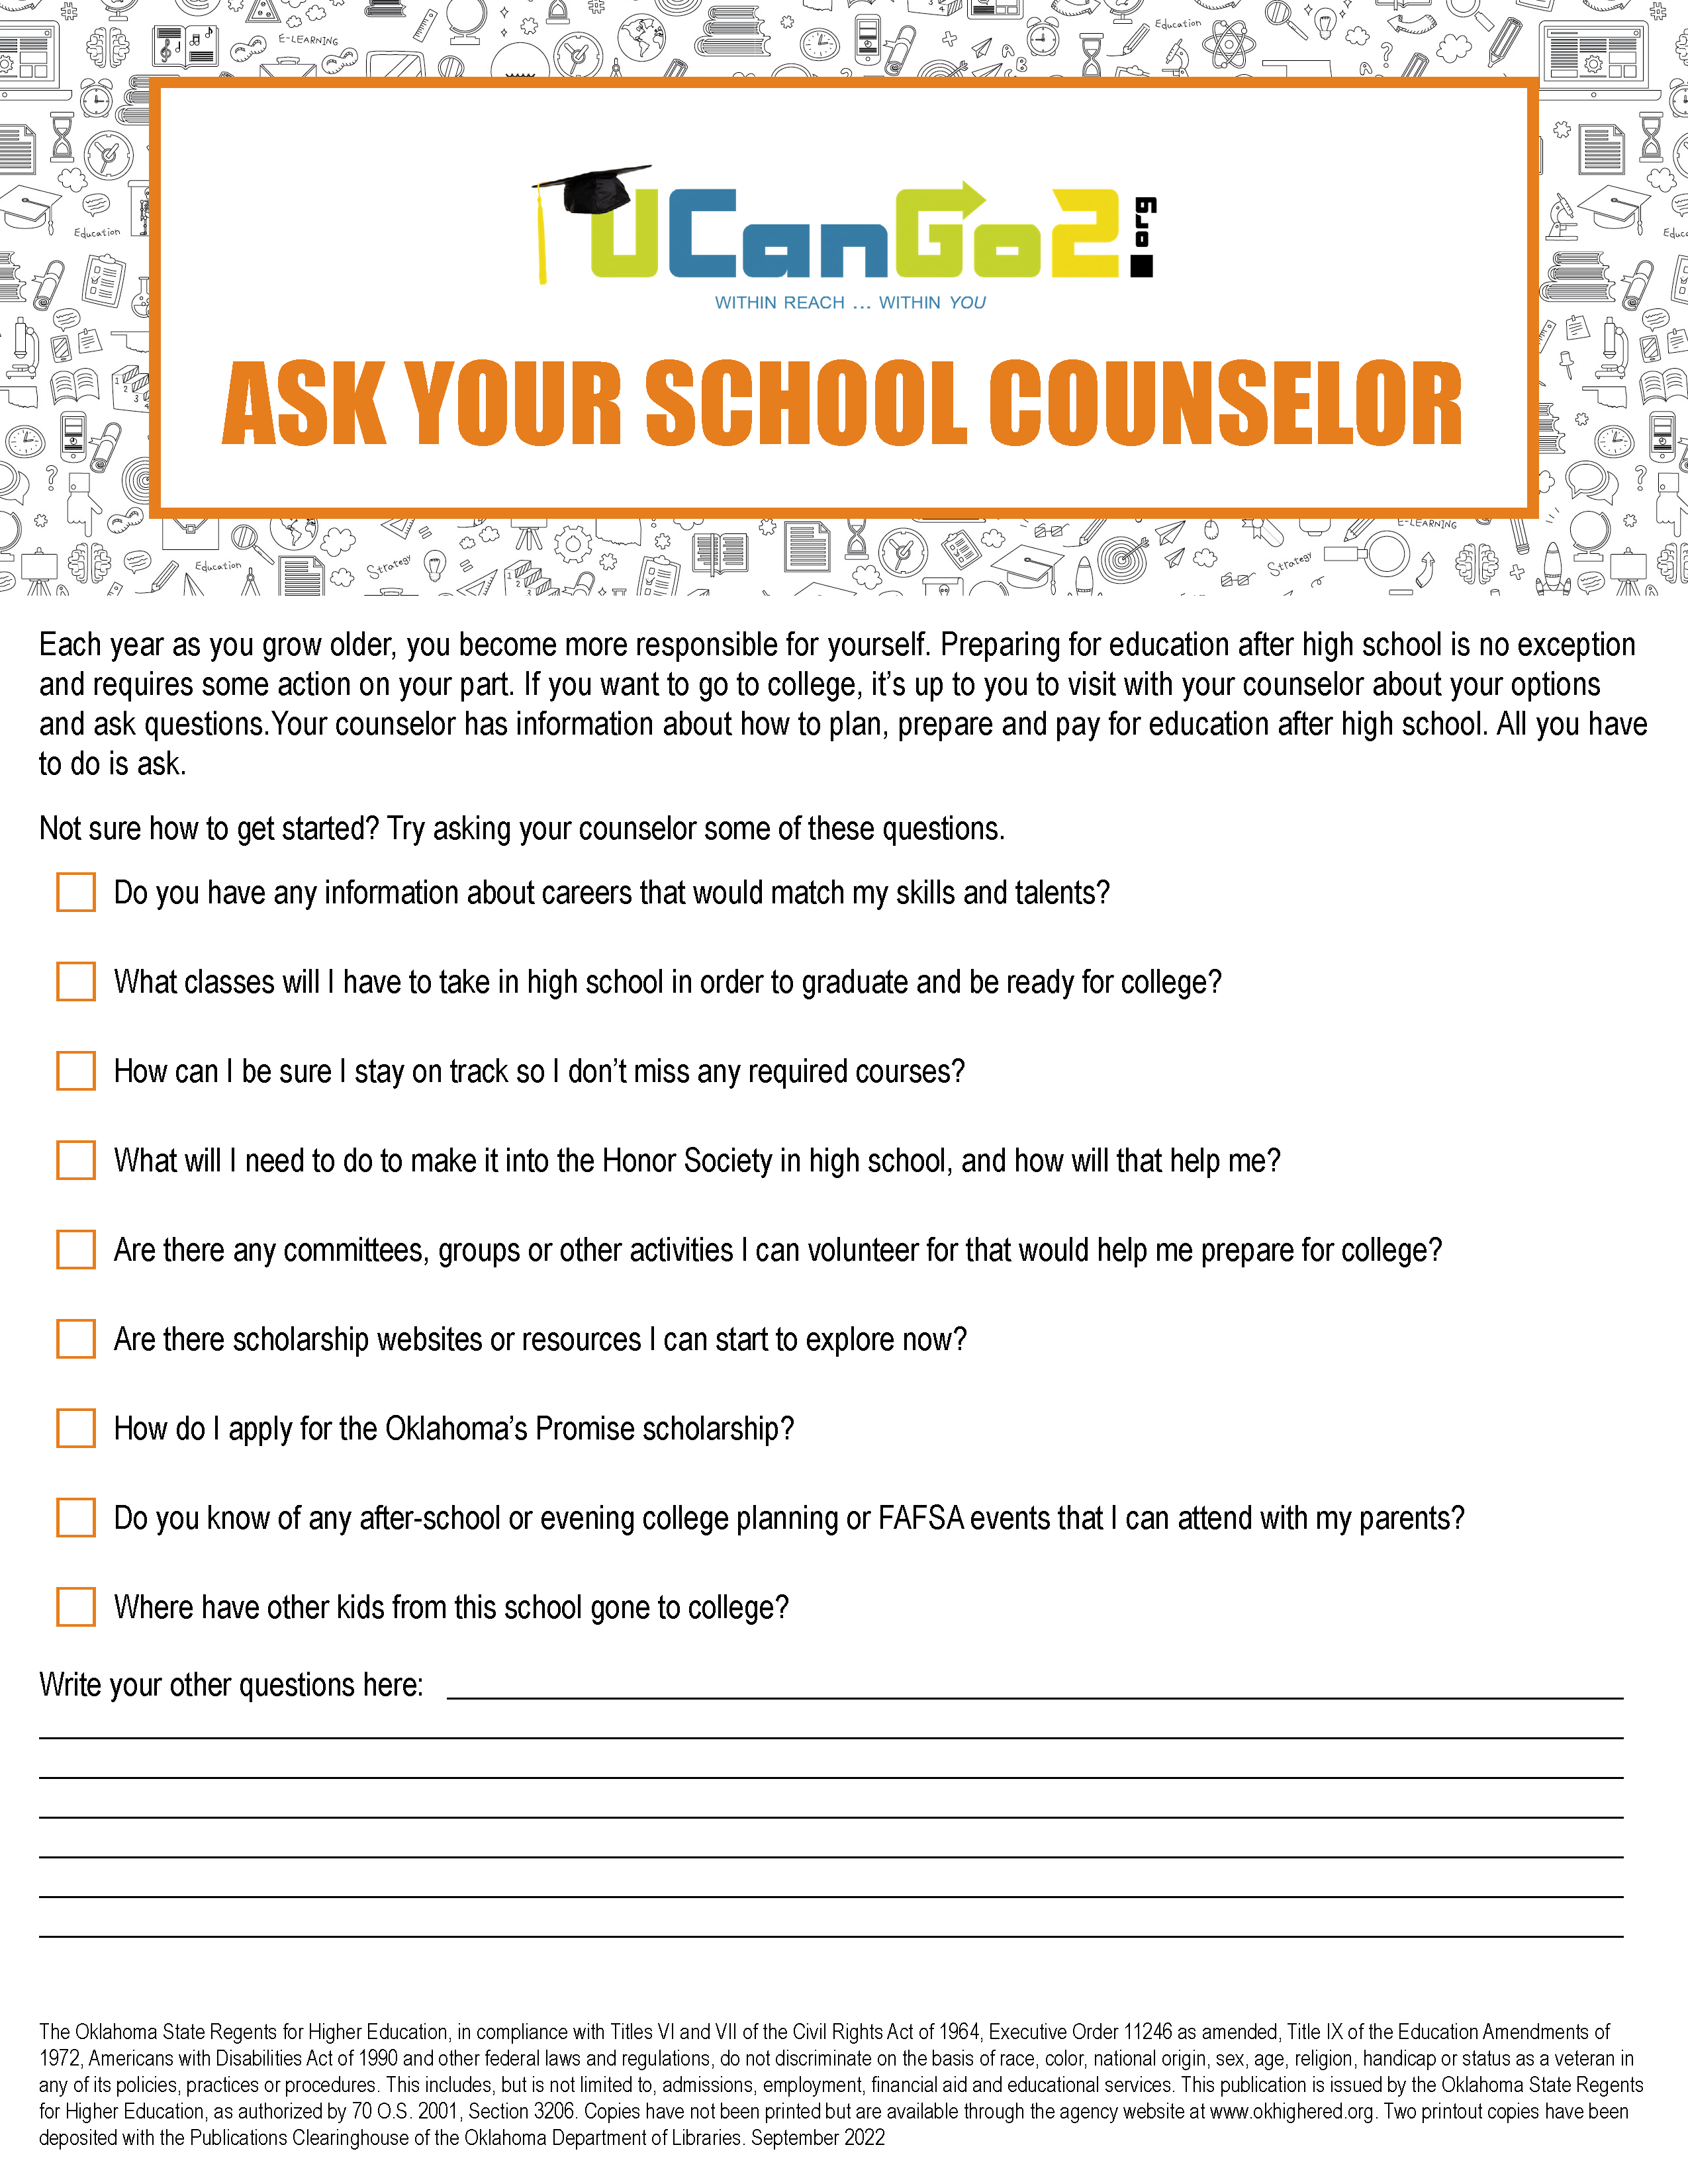 PDF of Ask Your School Counselor opens in a new tab